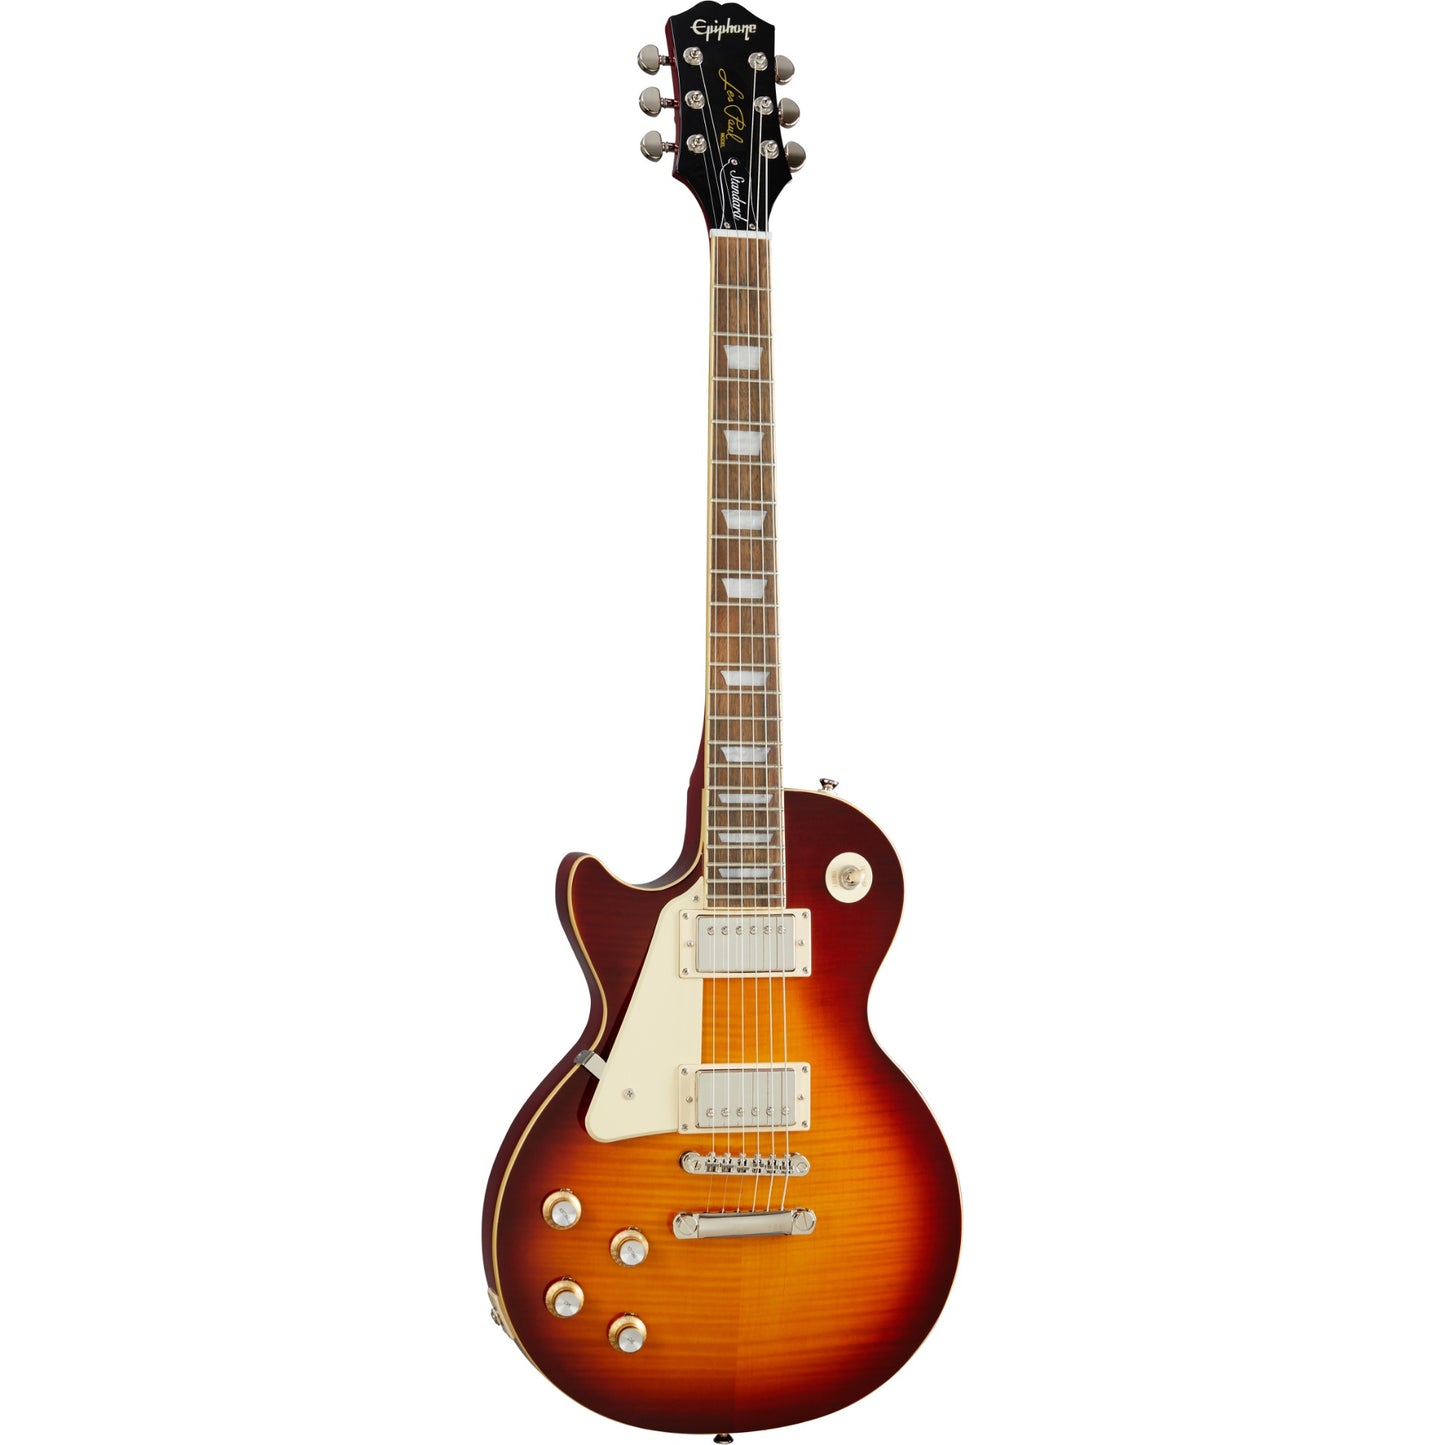 Epiphone Left Handed Les Paul Standard '60s Electric Guitar in Iced Tea